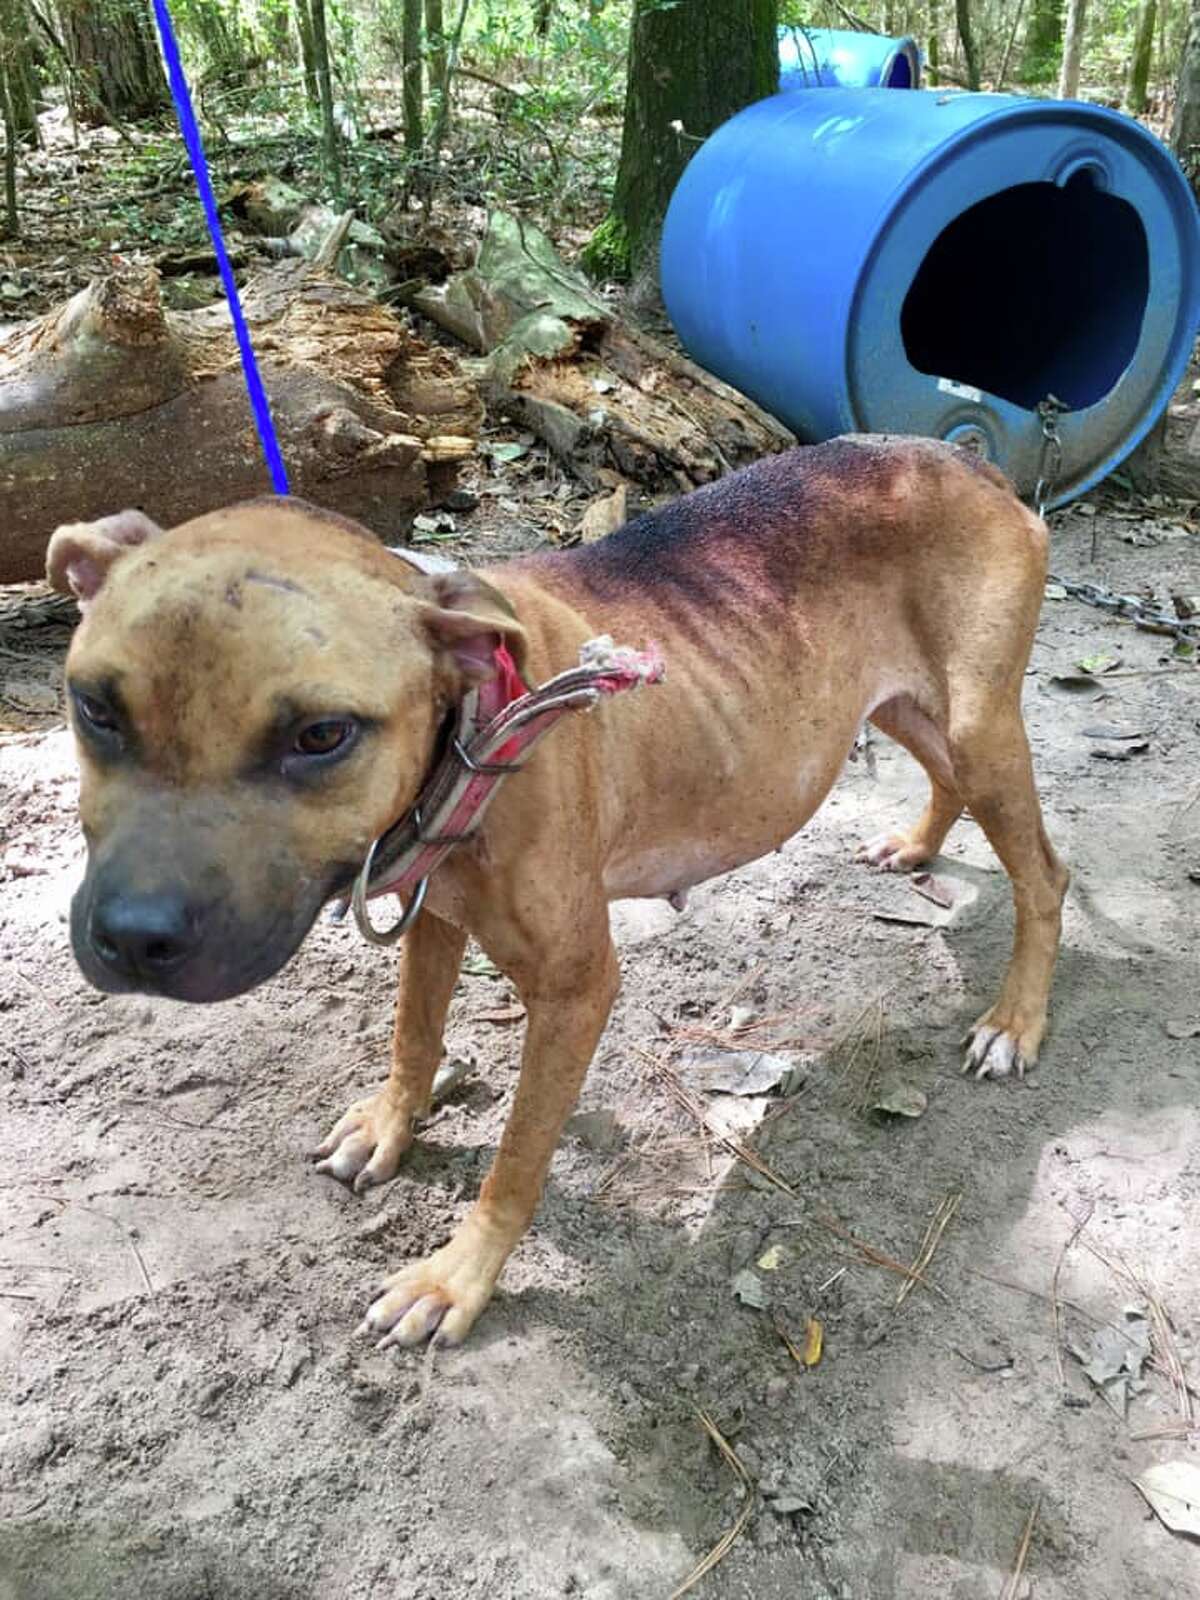 Rescuers found the dogs bound with 15-pound metal chains to trees in a wooded area off Hollyknoll Drive in Plantersville, according to a release from the Grimes County Sheriff's Office. The dogs were found a day after Tropical Storm Imelda, and endured days of heavy rain with minimal access to food and water.